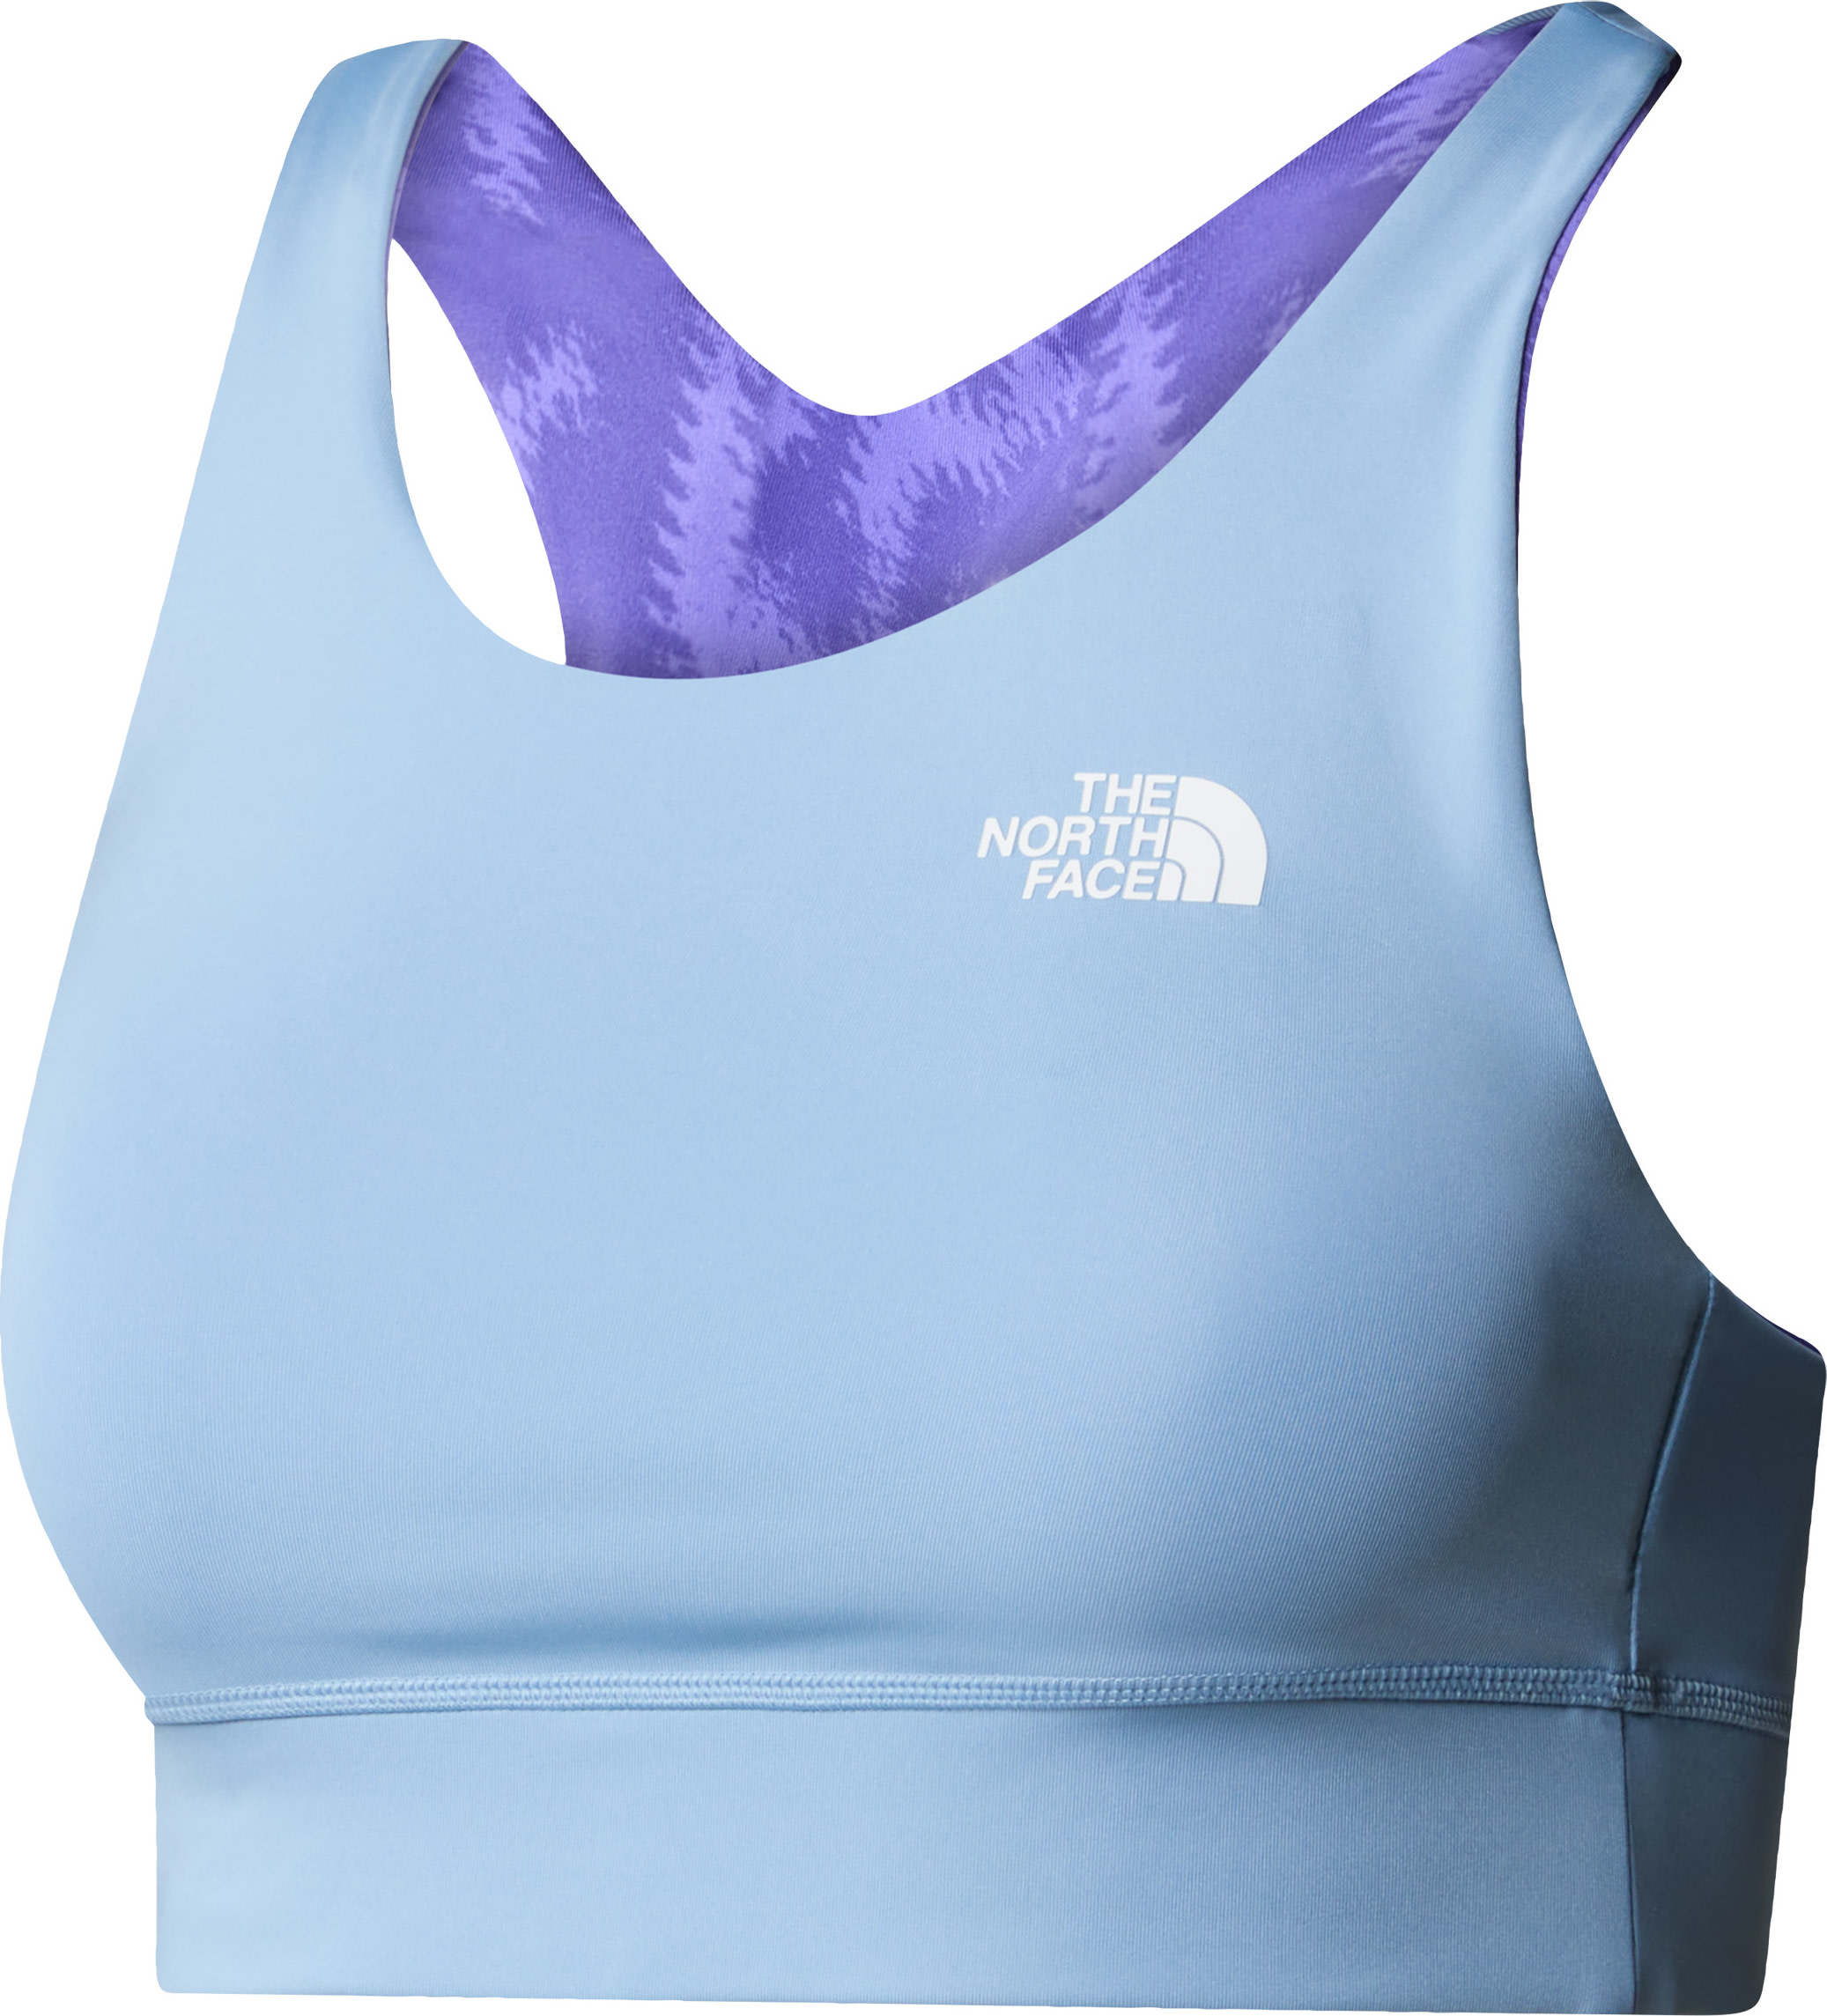 The North Face The North Face Women's Flex Printed Bra Optic Violet Abstract P M, Optic Violet Abstract P